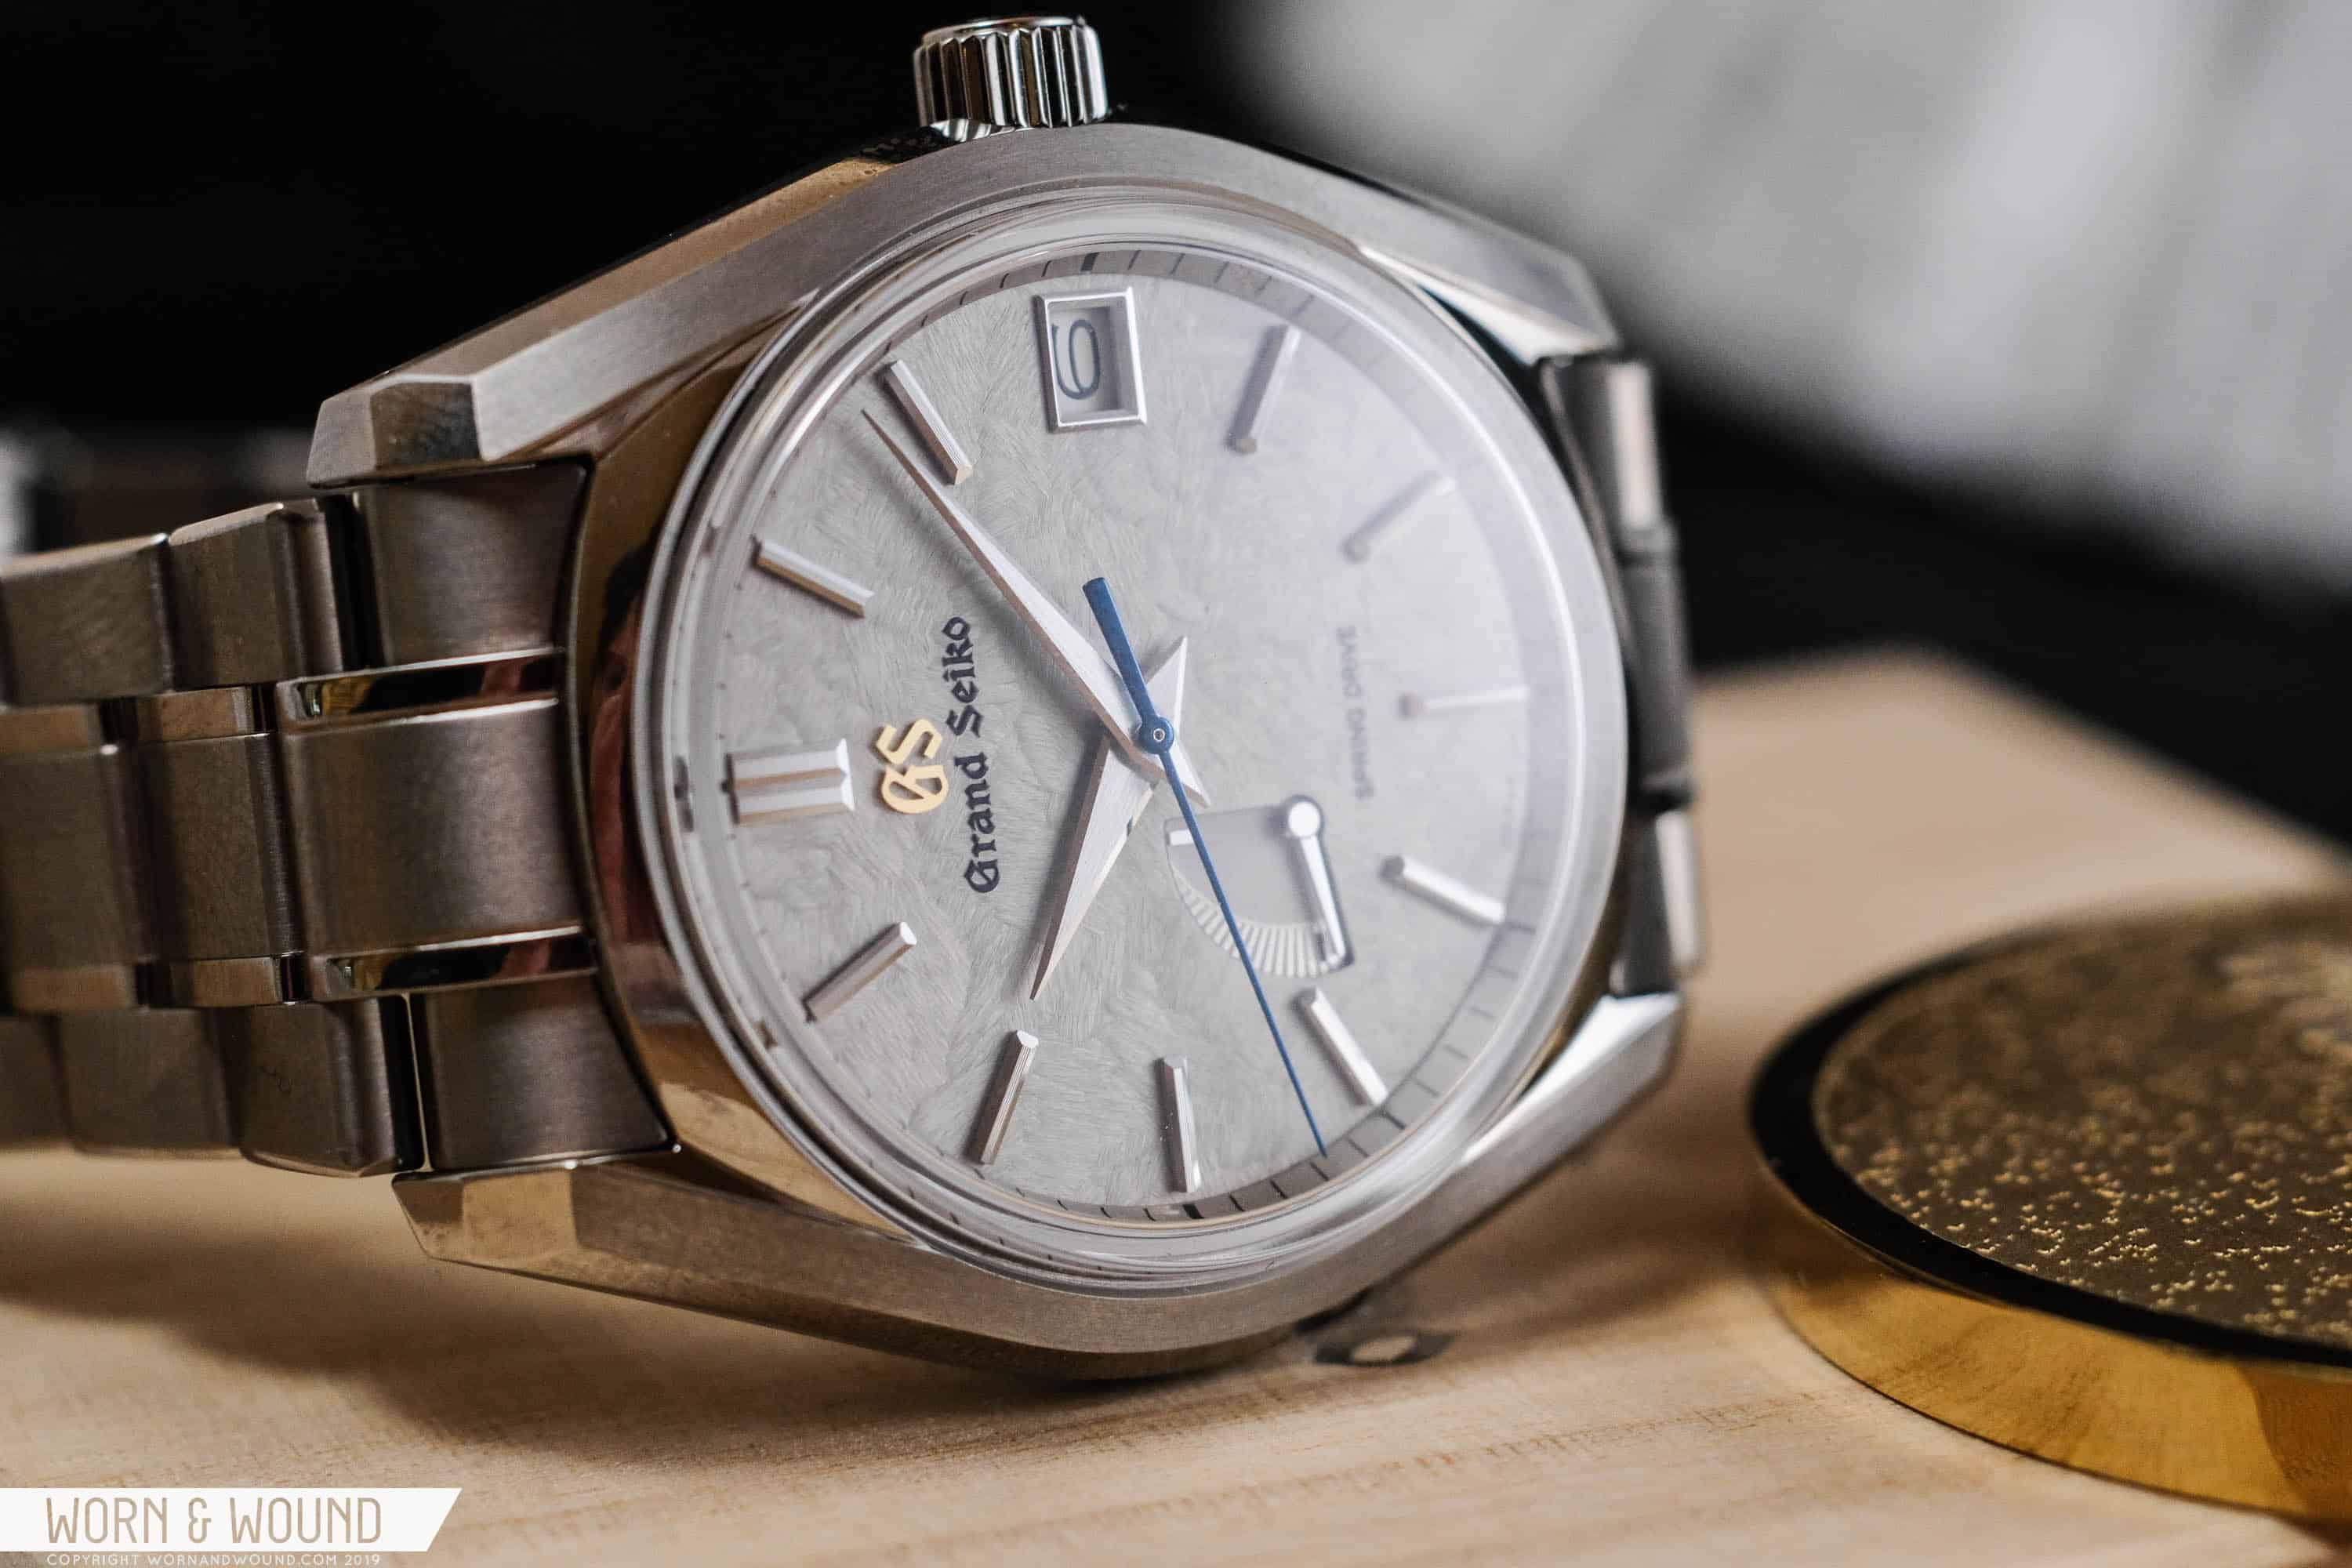 First Look at the USA-Exclusive Grand Seiko Seasons Collection (Refs.  SBGH271, SBGH273, SBGA413, and SBGA415) - Worn & Wound